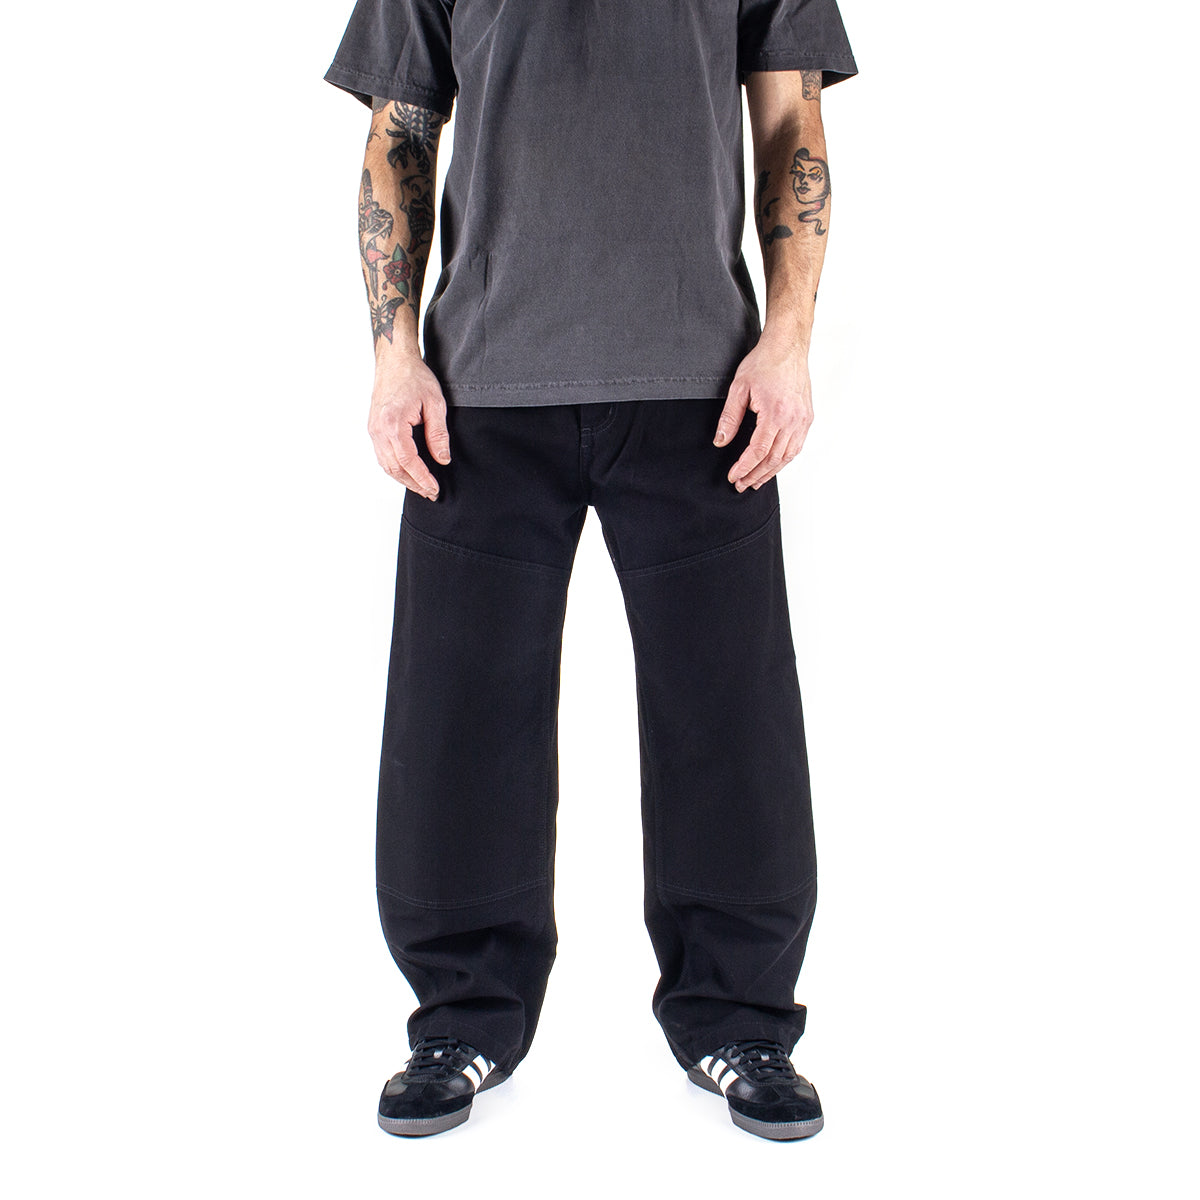 Carhartt WIP | Wide Panel Pant Style # I031393 -8902 Color : Black